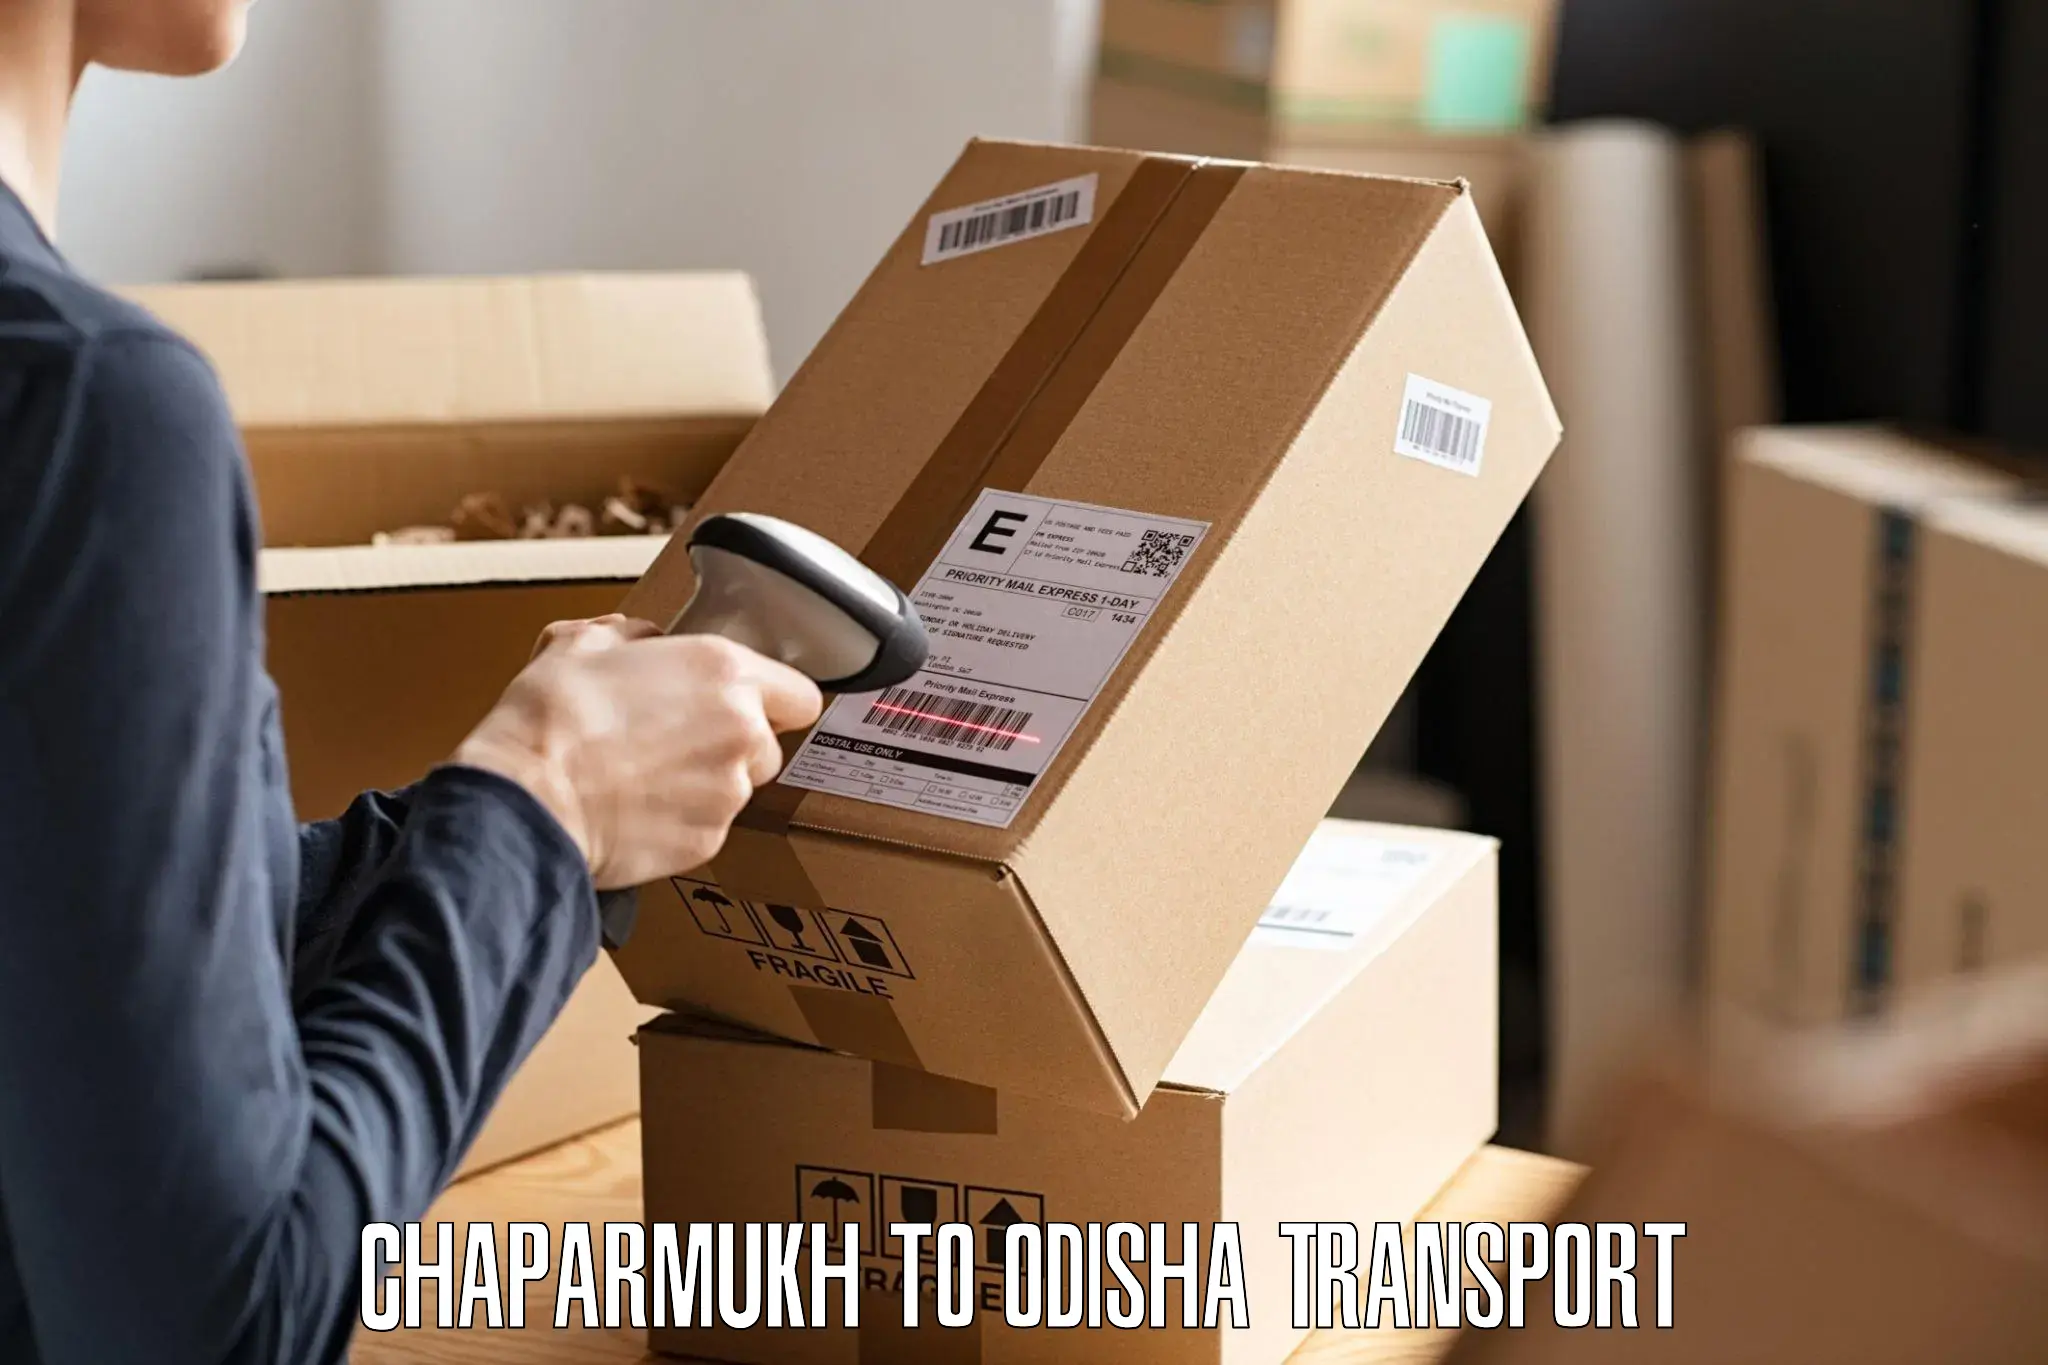 Domestic transport services Chaparmukh to Dhamanagar